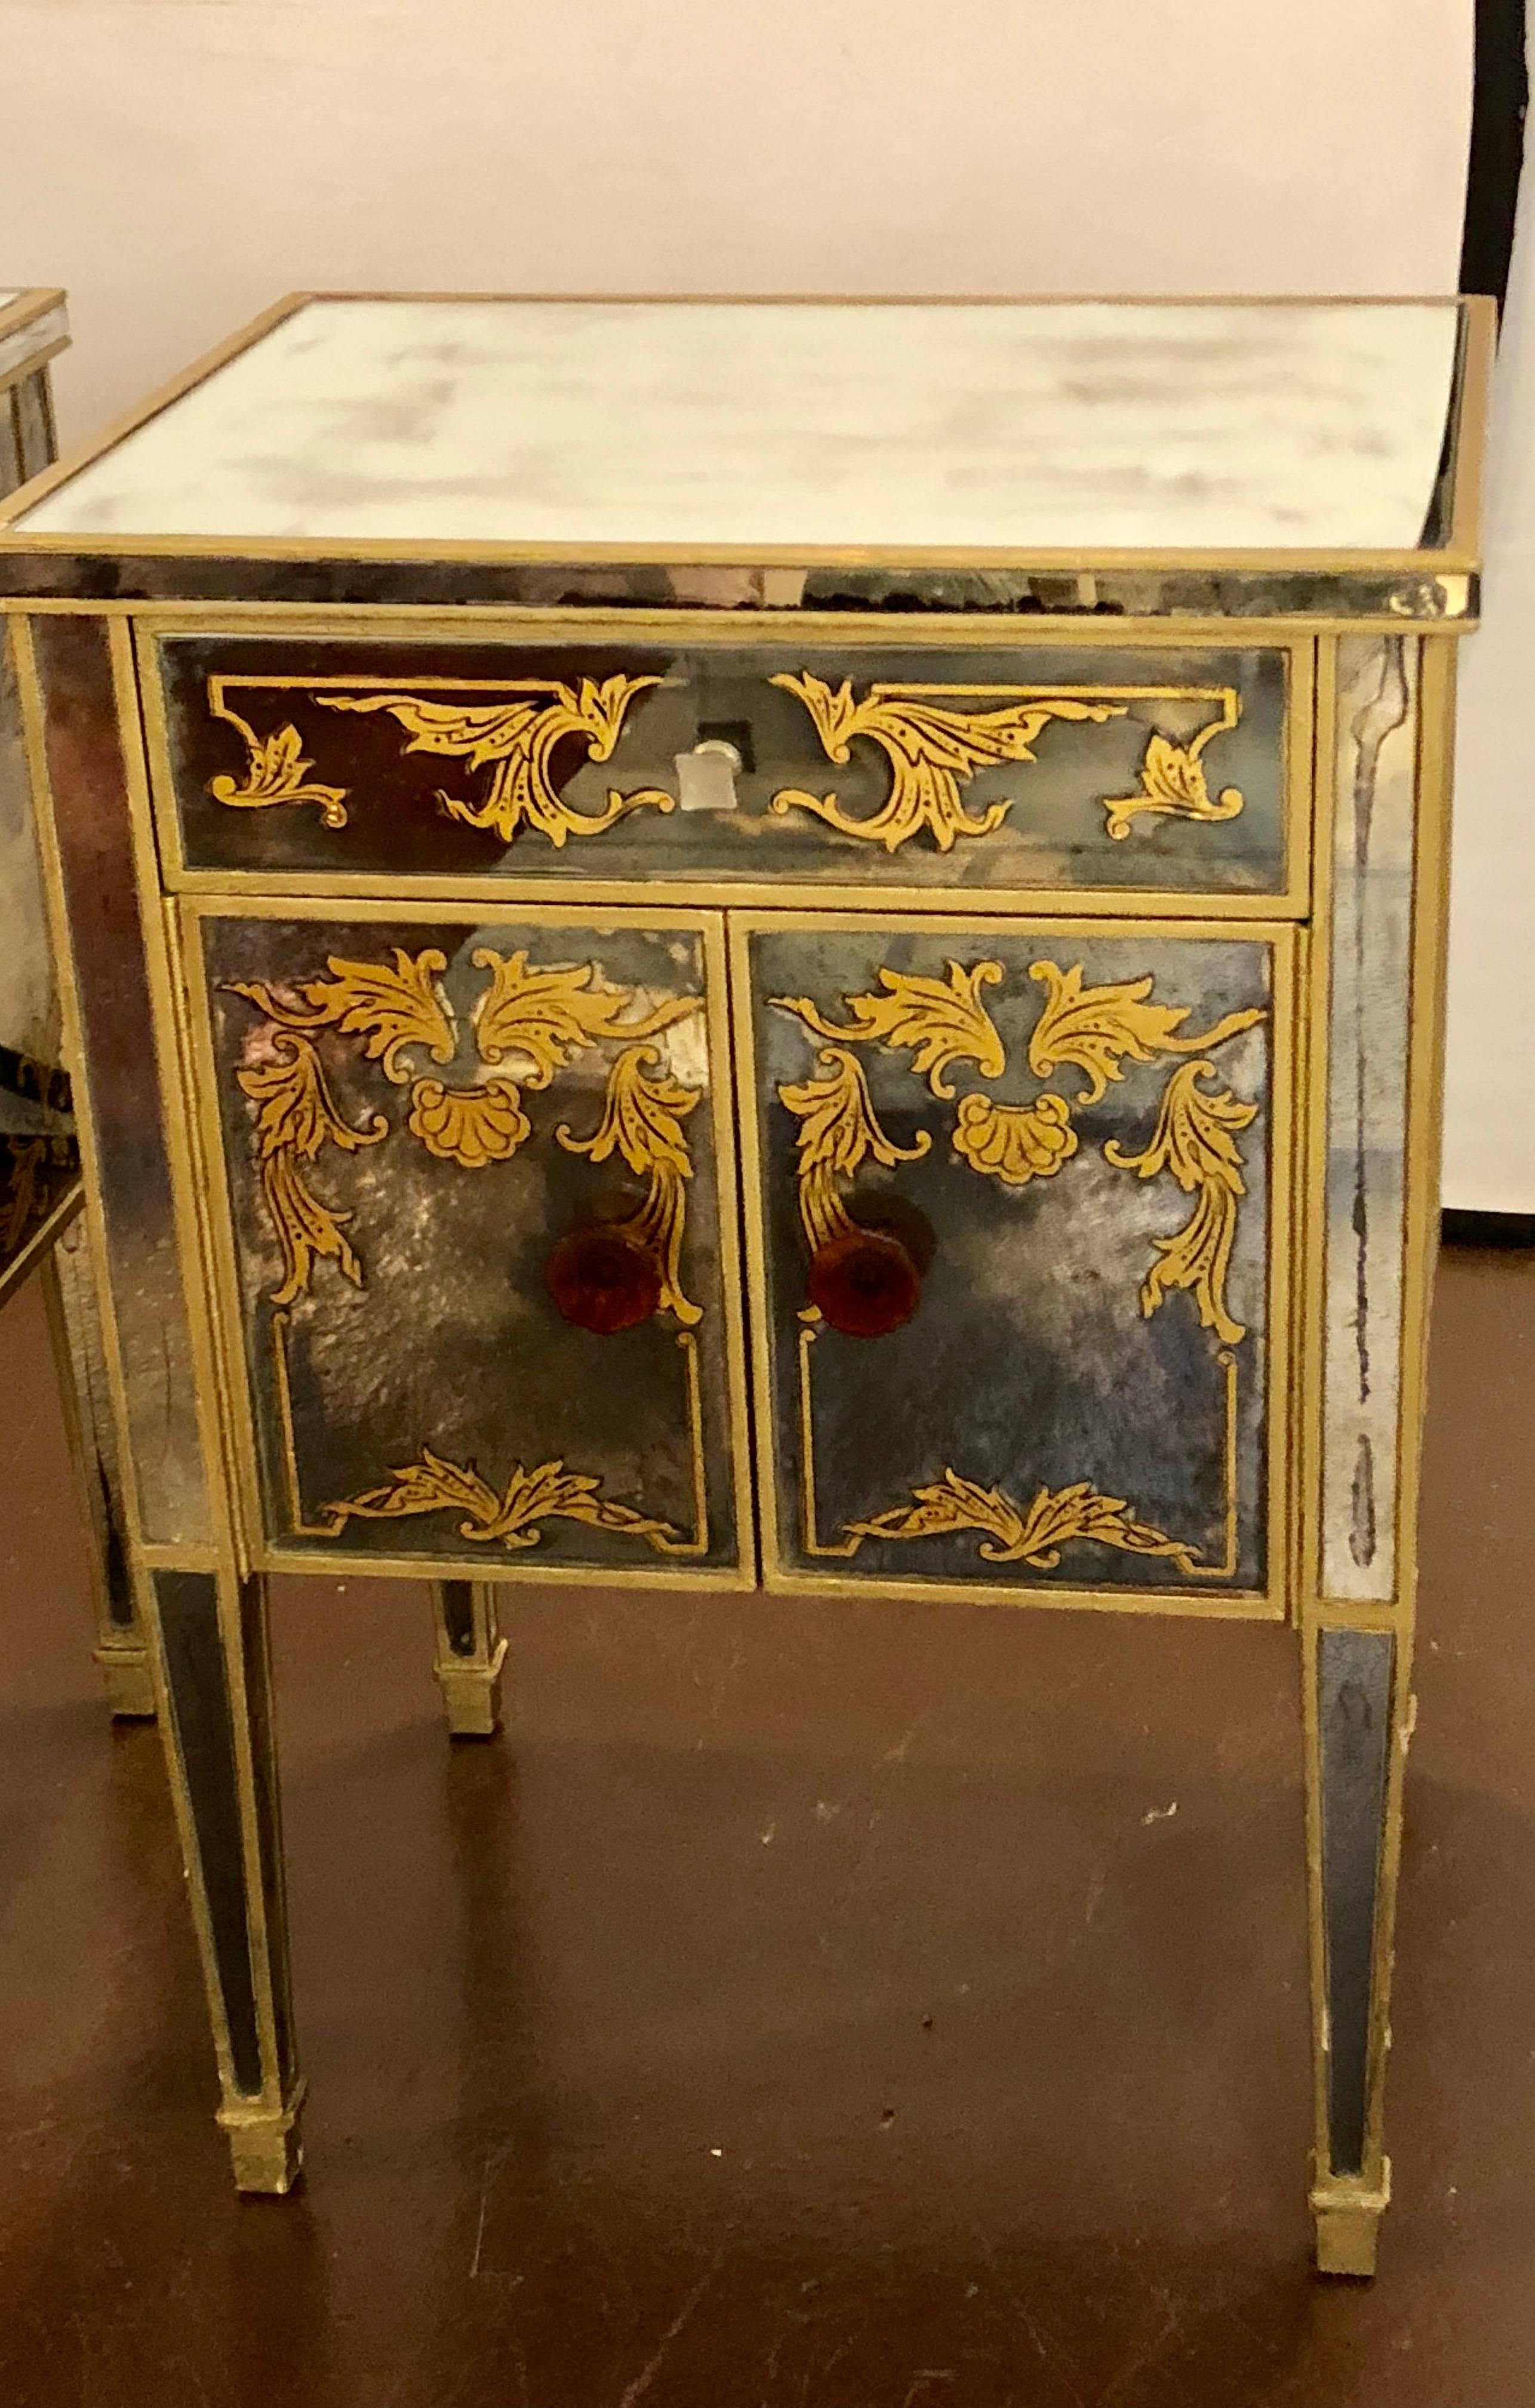 Pair of églomisé Italian mirrored nightstands or end tables. A pair of wooden vintage case with later decorated mirrored and églomisé decorated panels. The tapering legs supporting a pair of doors under a single drawer each distress decorated.